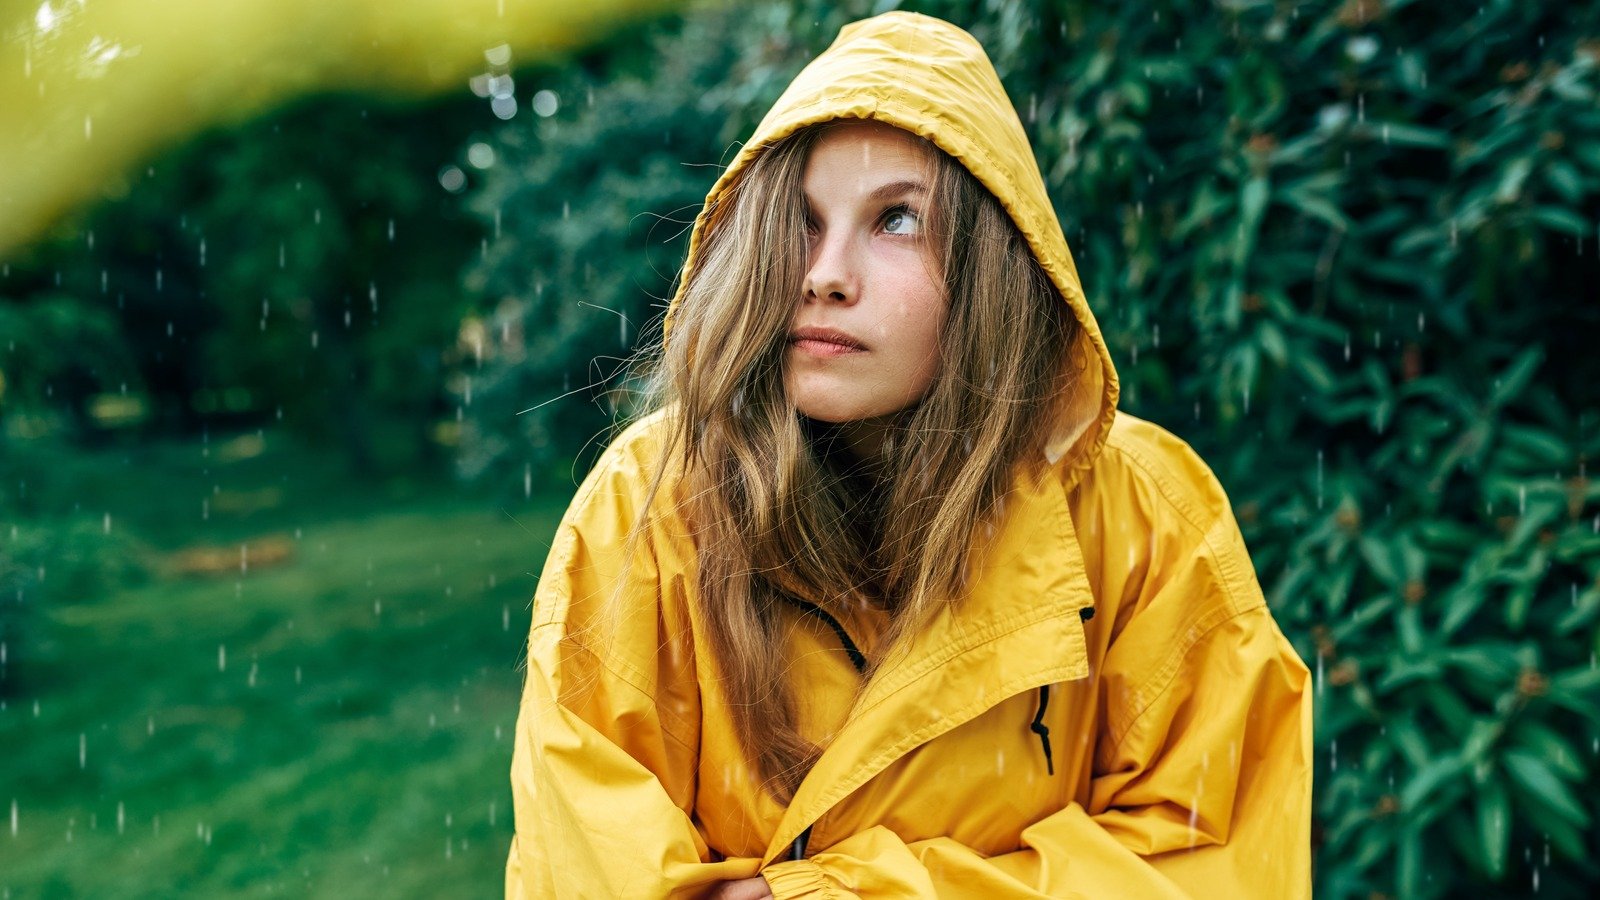 Science Explains Why Rain Makes Us Feel So Tired